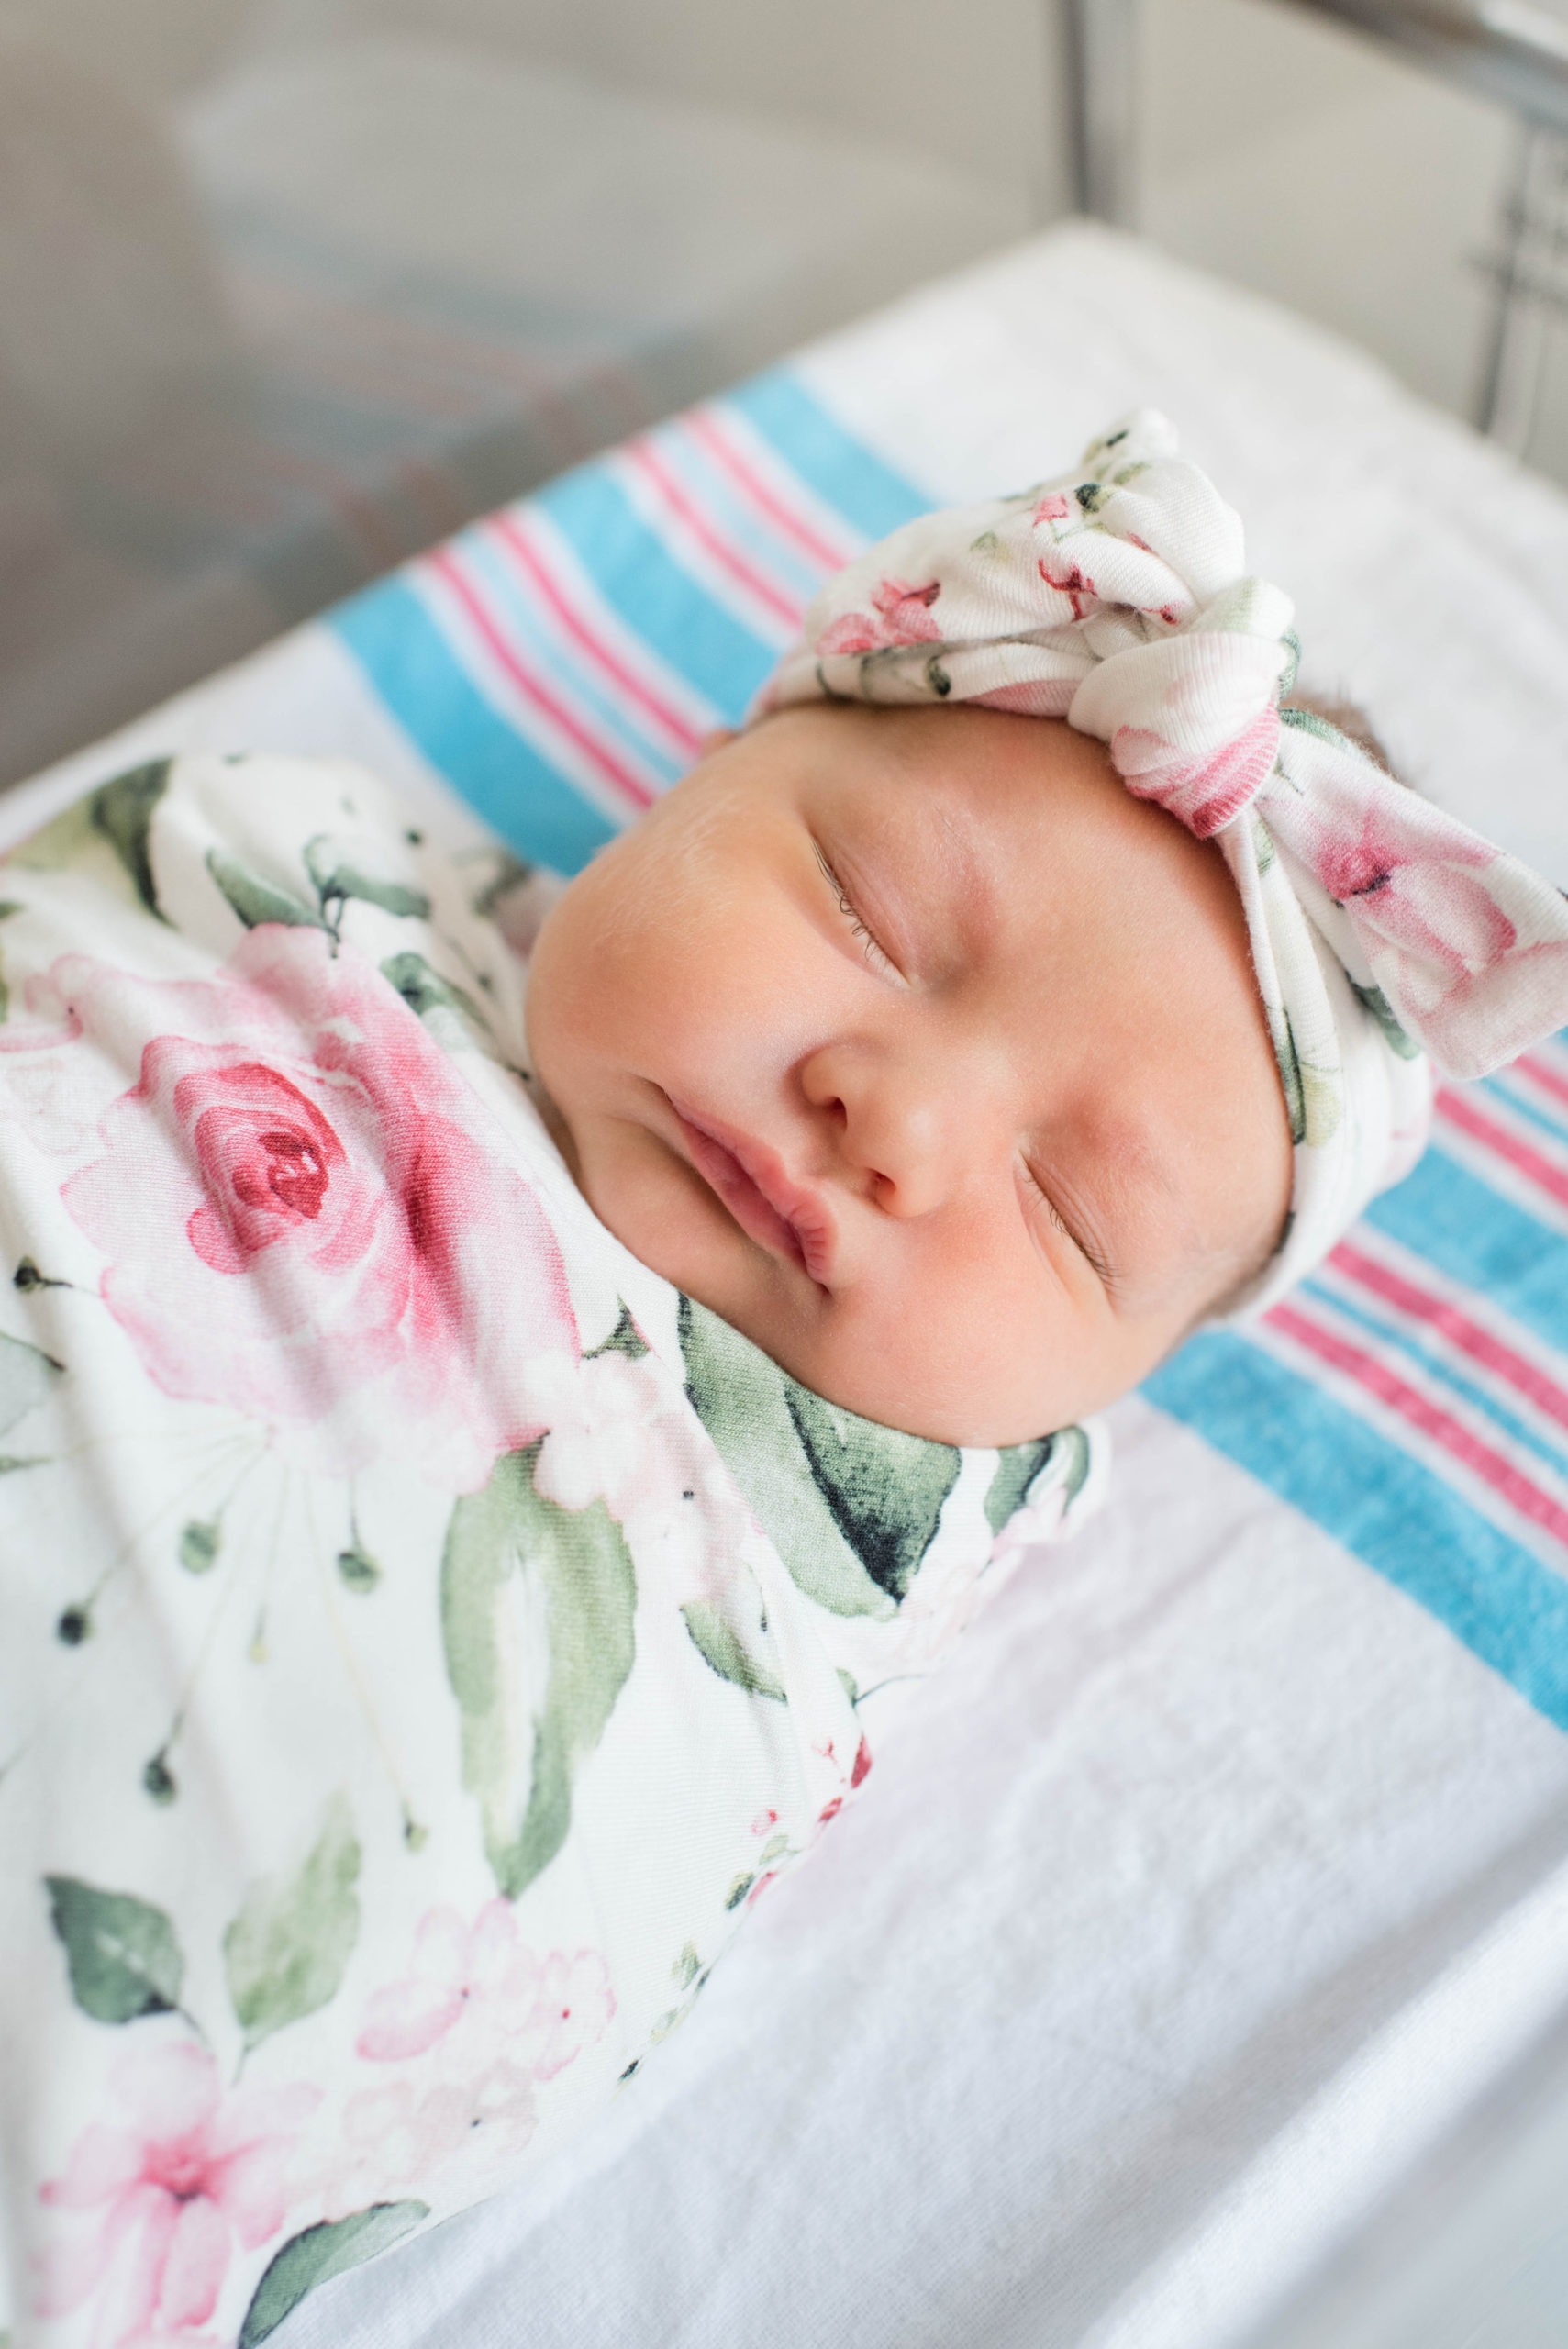 Welcome to the World, Caroline Noelle! | Emily Moore | Private Photo Editor | This week, we celebrated the birth of our sweet daughter, Caroline!